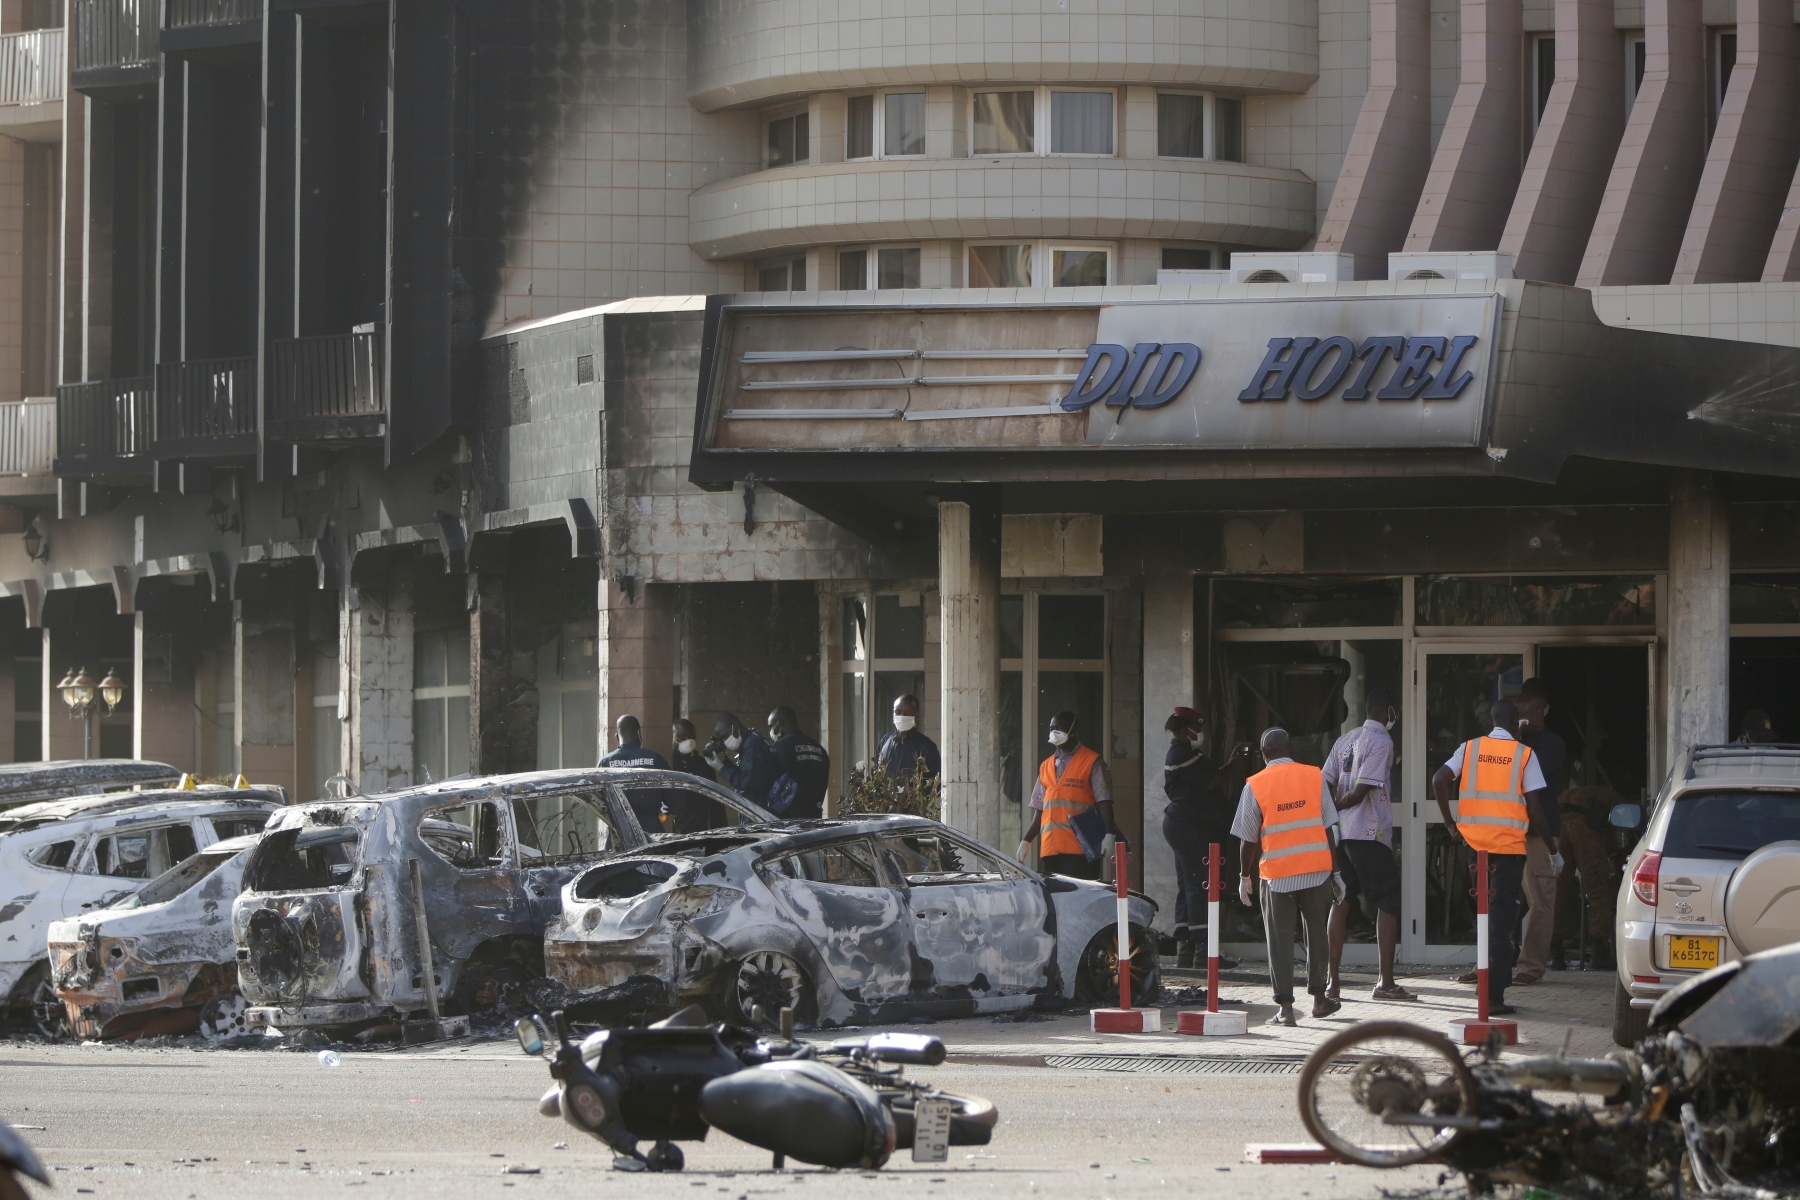 Rescue workers inspect damaged cars at the entrance of the Splendid Hotel in Ouagadougou, Burkina Faso, Saturday, Jan. 16, 2016. The overnight seizure of a luxury hotel in Burkina Faso's capital by al-Qaida-linked extremists ended Saturday when Burkina Faso and French security forces killed four jihadist attackers and freed more than 126 people, the West African nation's president said. (AP Photo/Sunday Alamba) Burkina Faso Hotel Attack